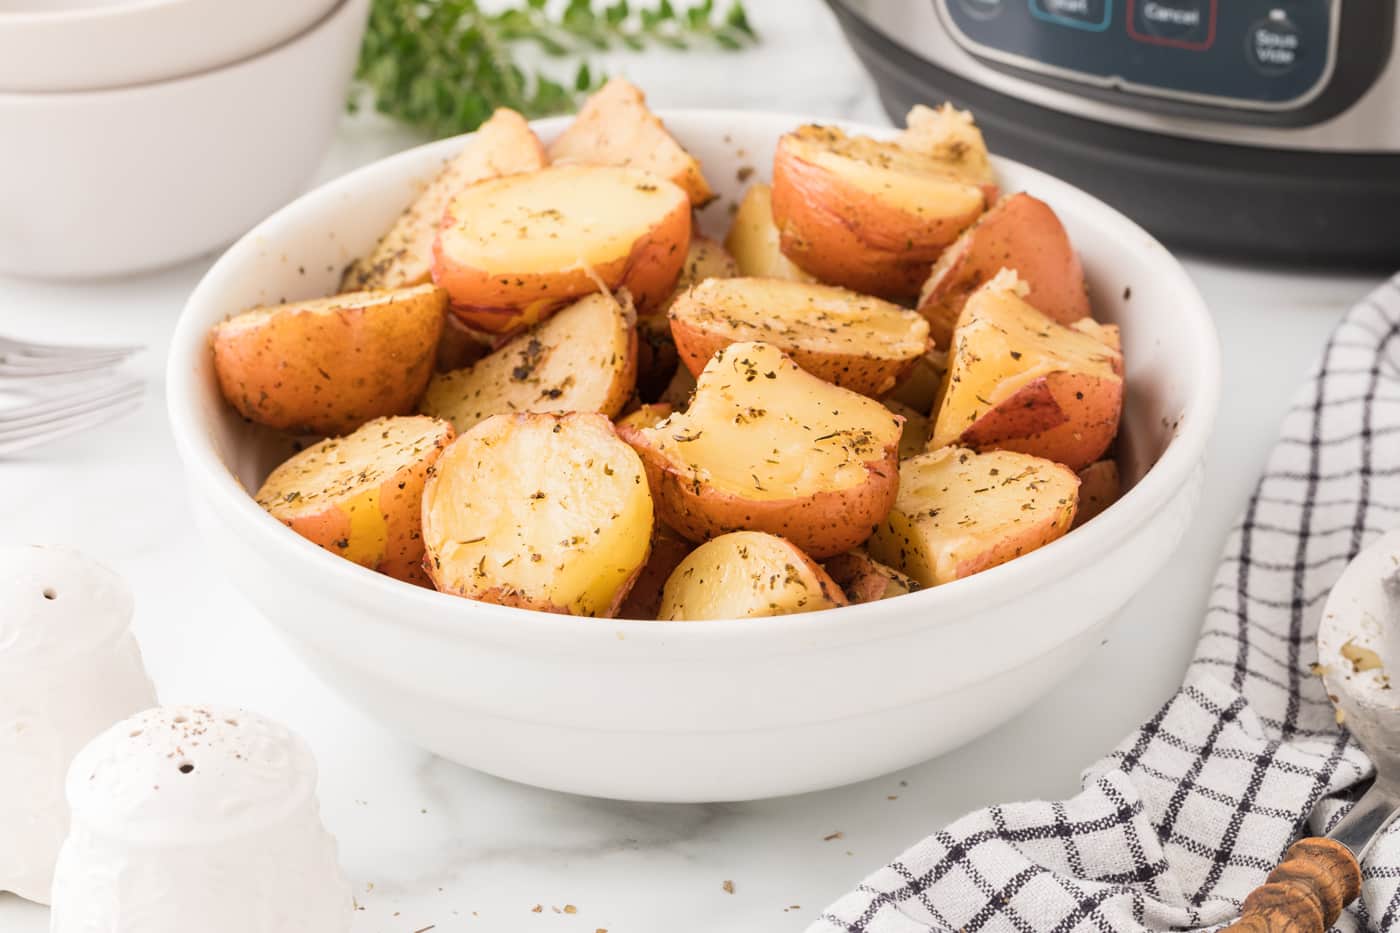 https://www.cleaneatingkitchen.com/wp-content/uploads/2020/07/instant-pot-red-potatoes-rosemary.jpg